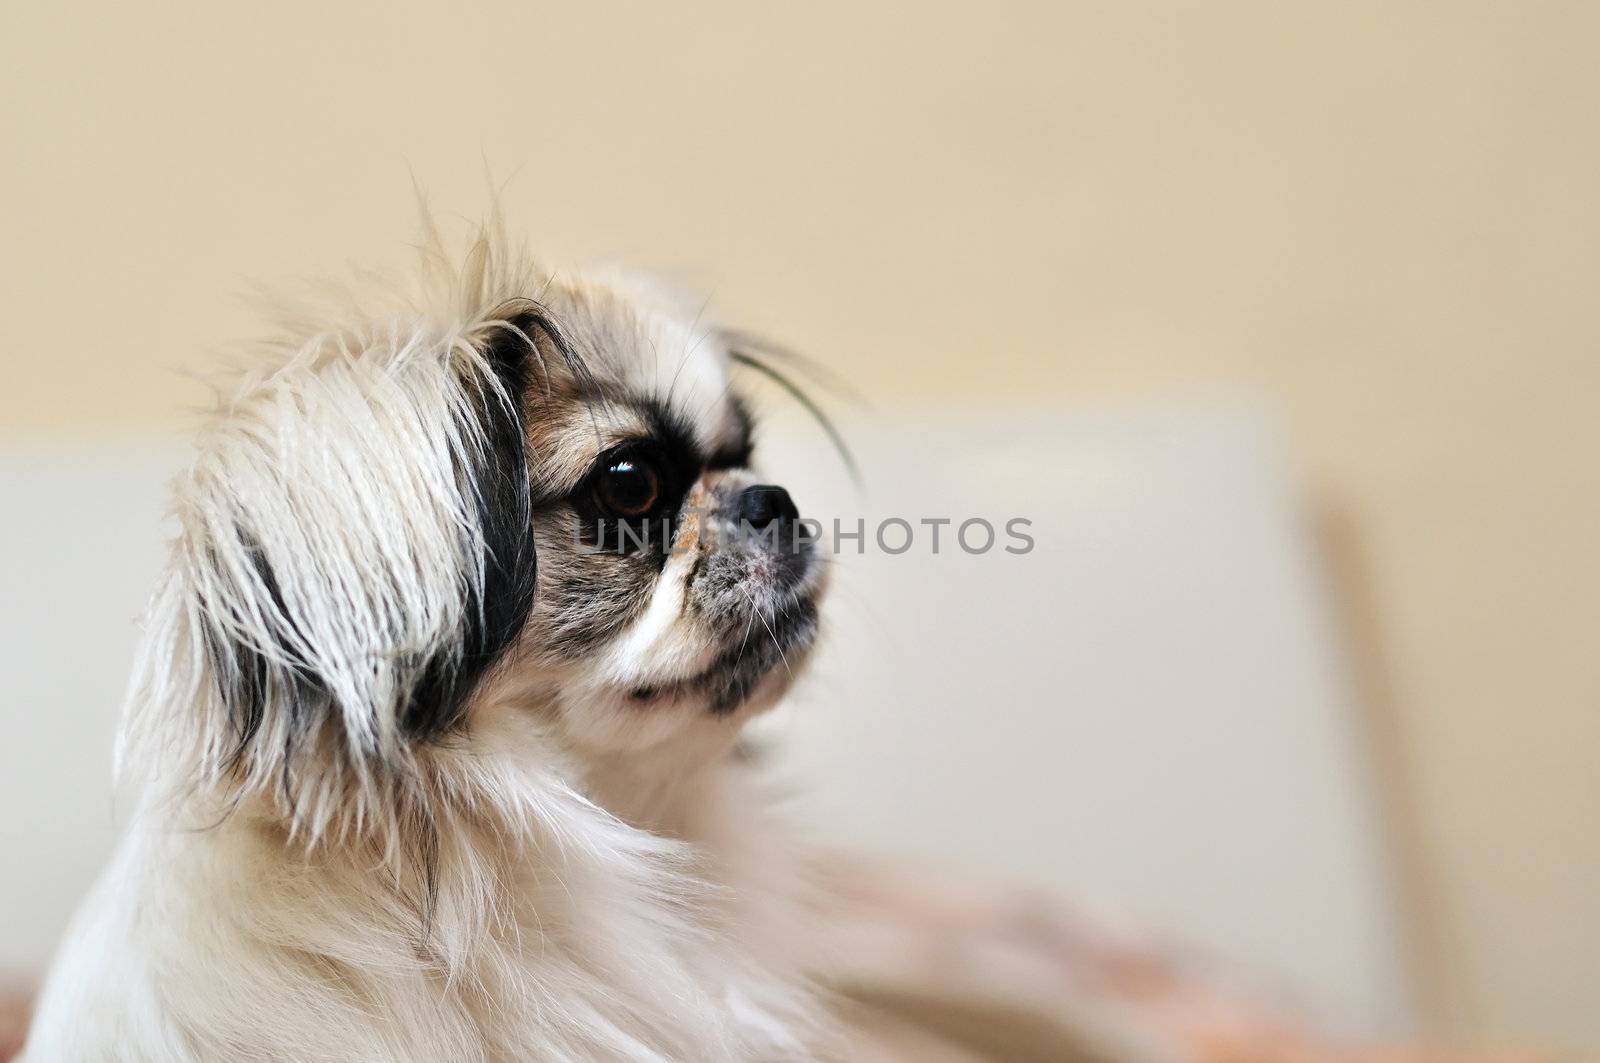 Japanese Chin in soft focus